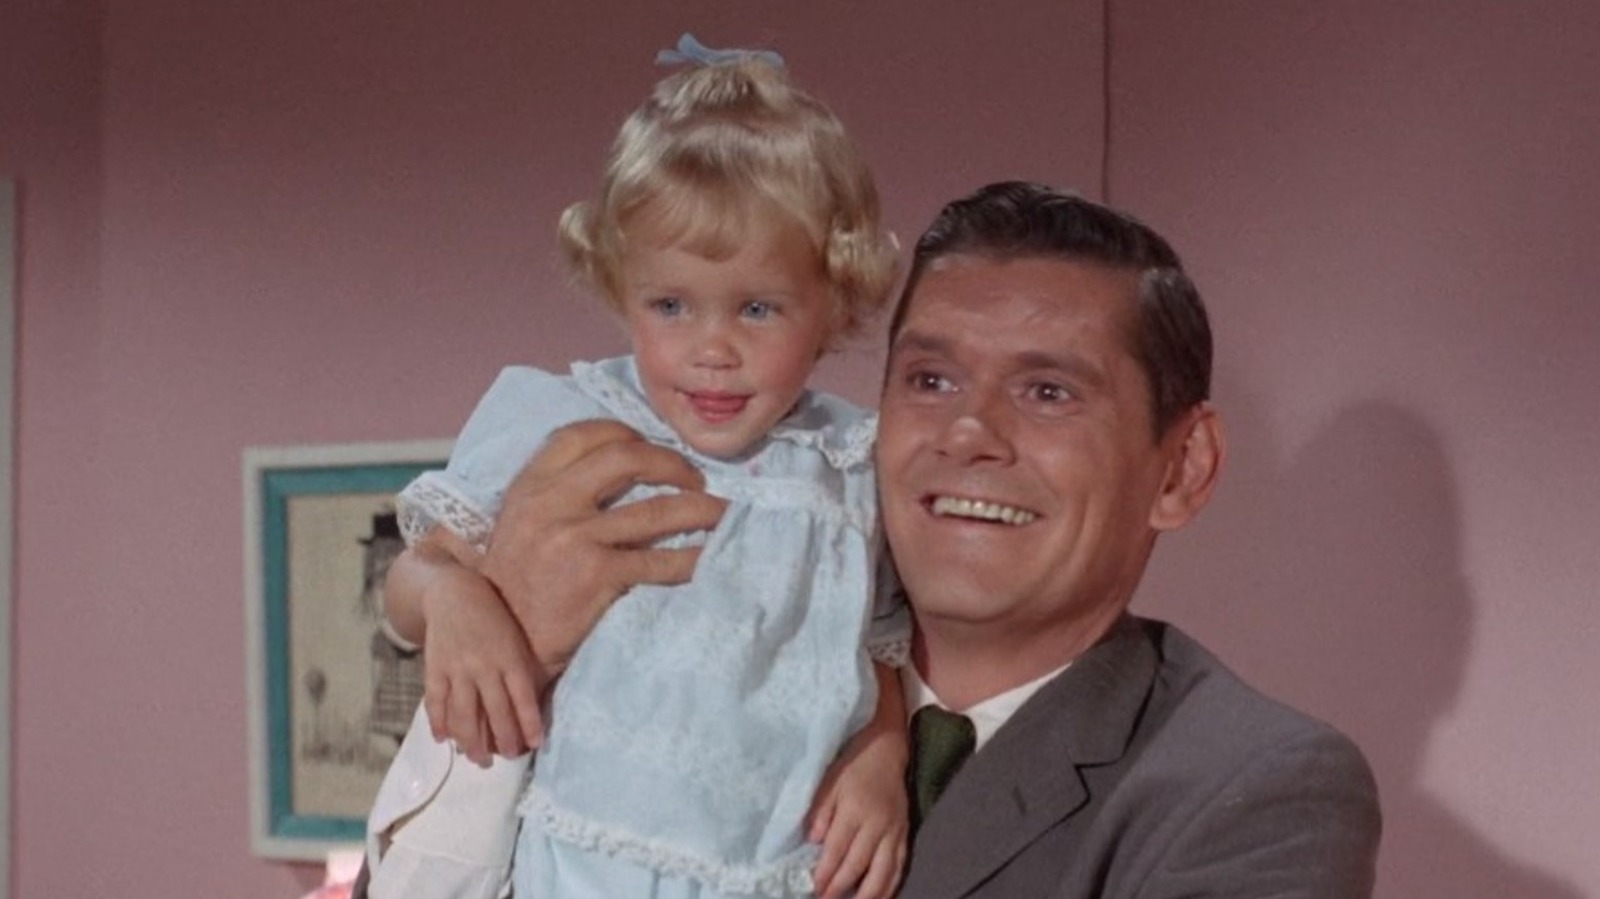 Who Played Darrin On Bewitched?